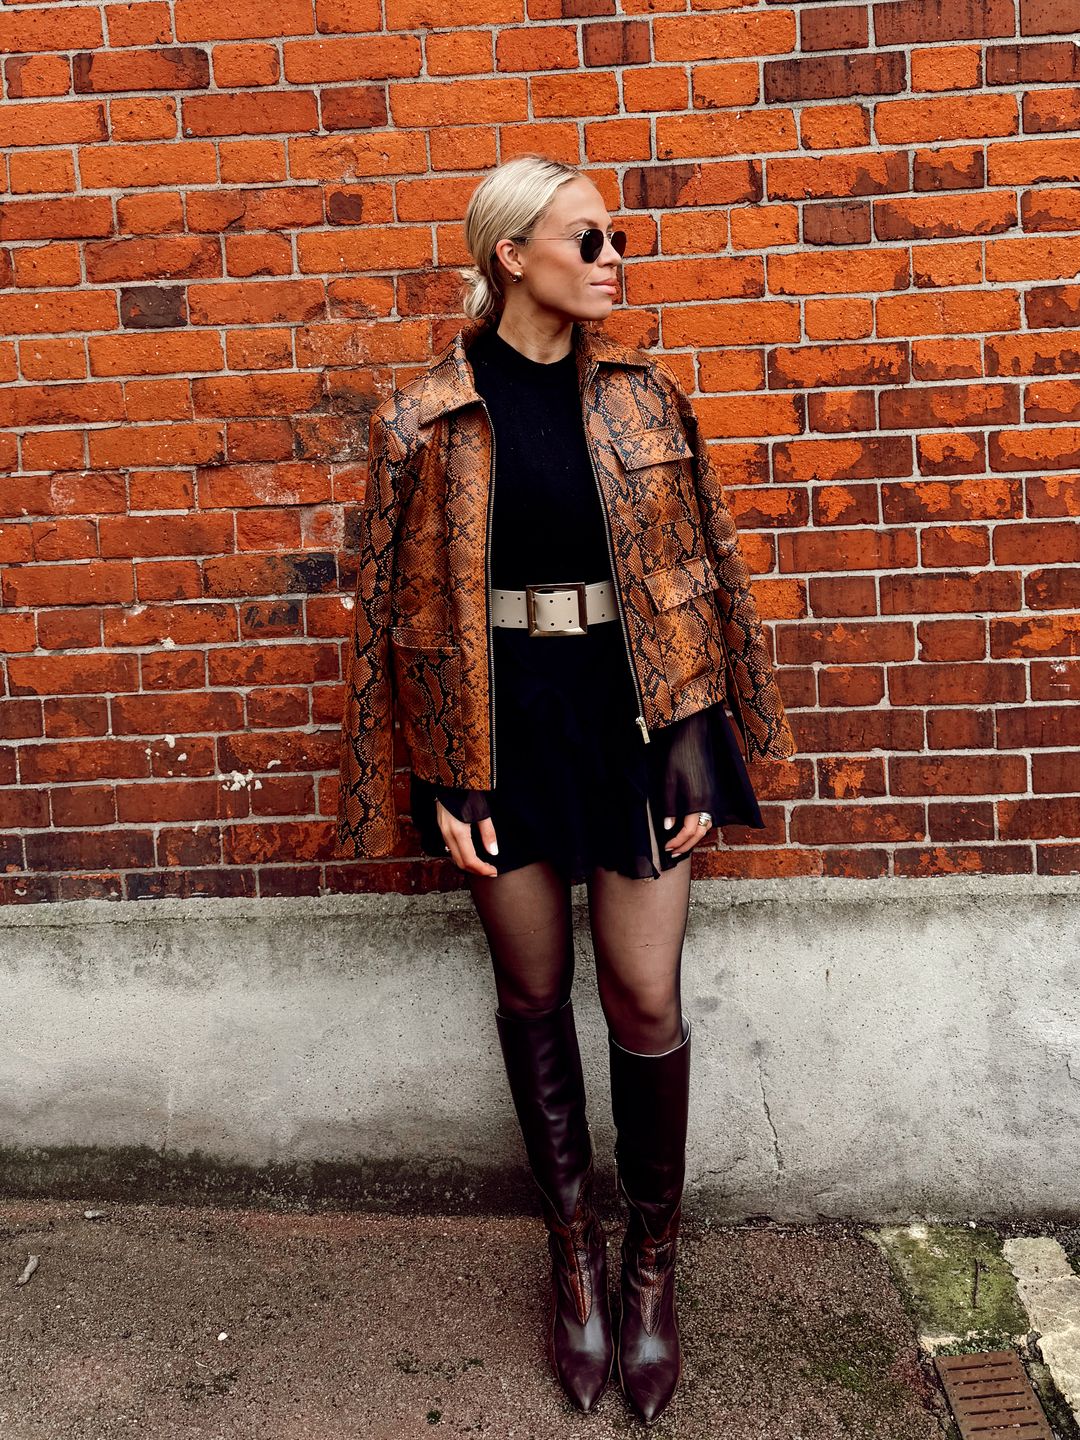 Lauren Ramsay poses in front of a brick wall at fashion week in a pair of knee high boots, a brown jacket and sunglasses.